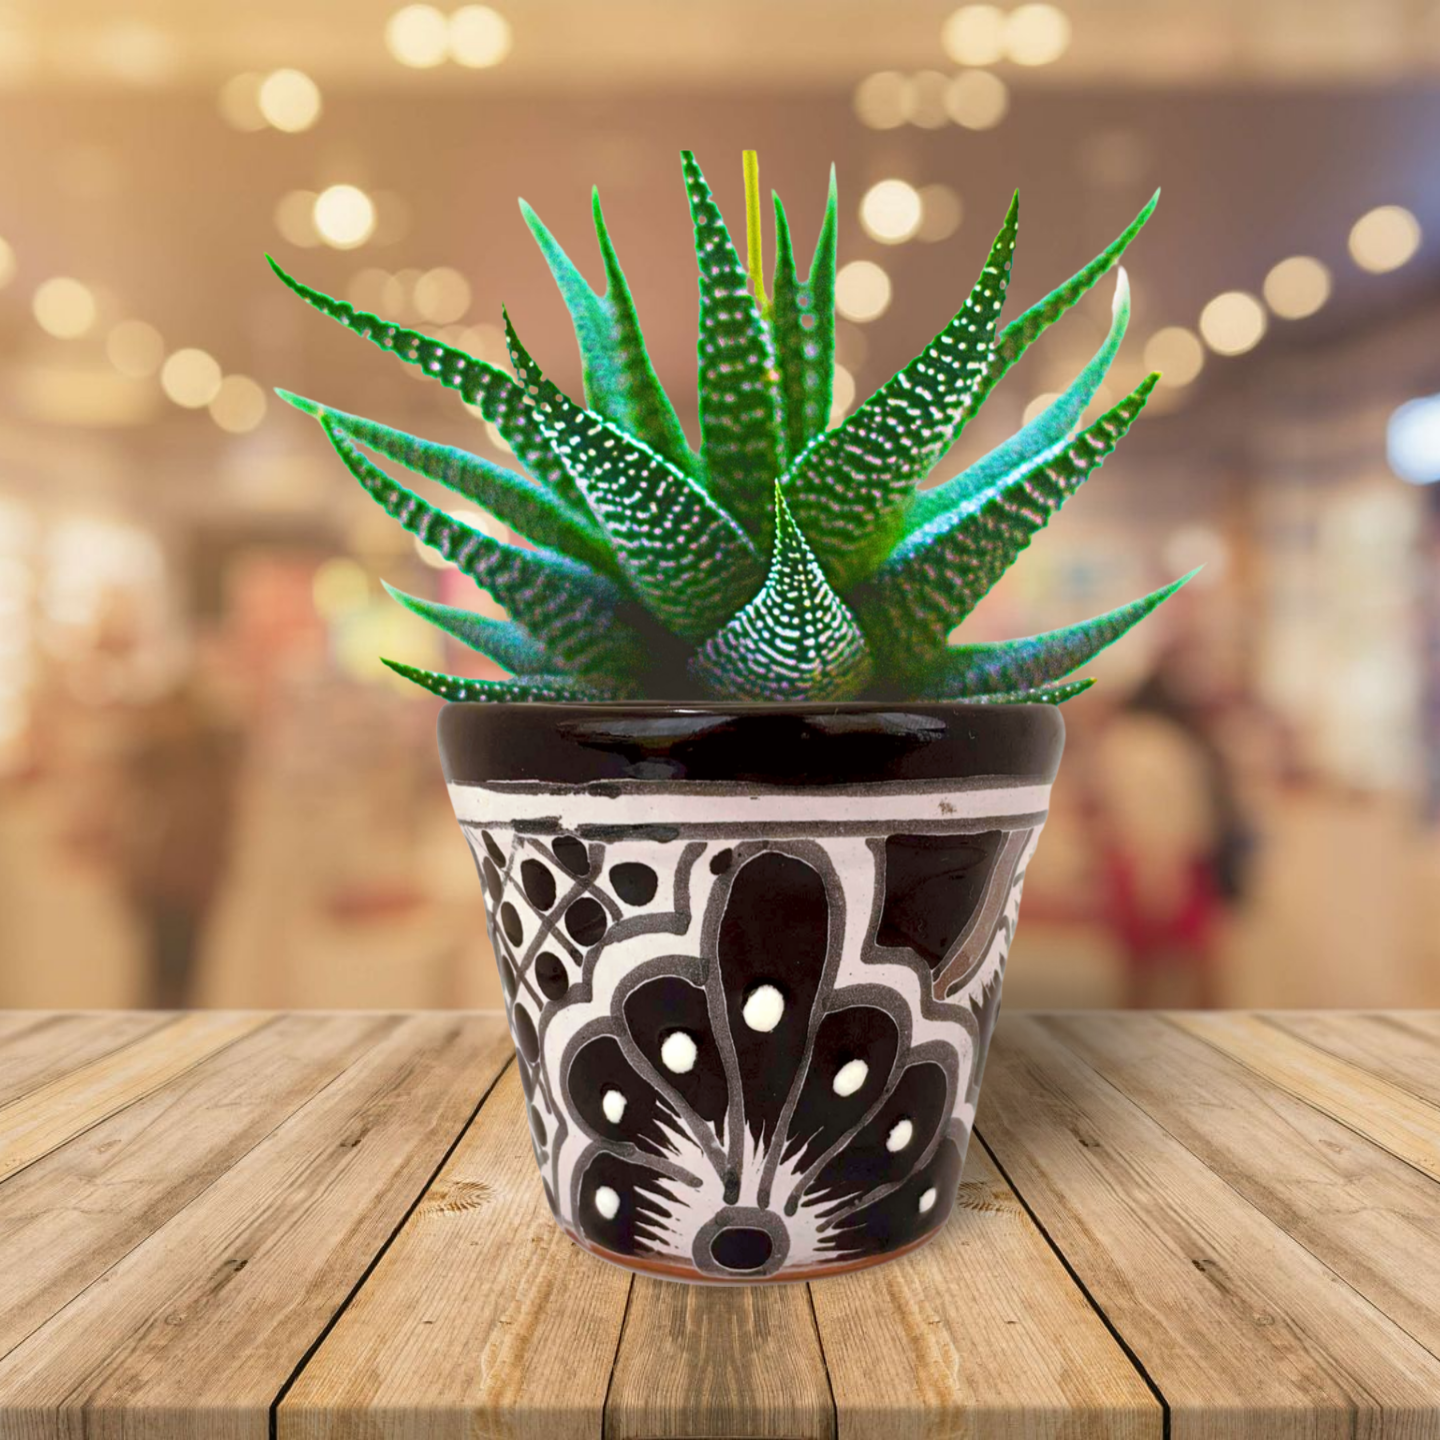 Black and WhiteTalavera Ceramic Succulent Plant Pots - Hand-Painted Mexican Artistry by Casa Fiesta Designs on a table